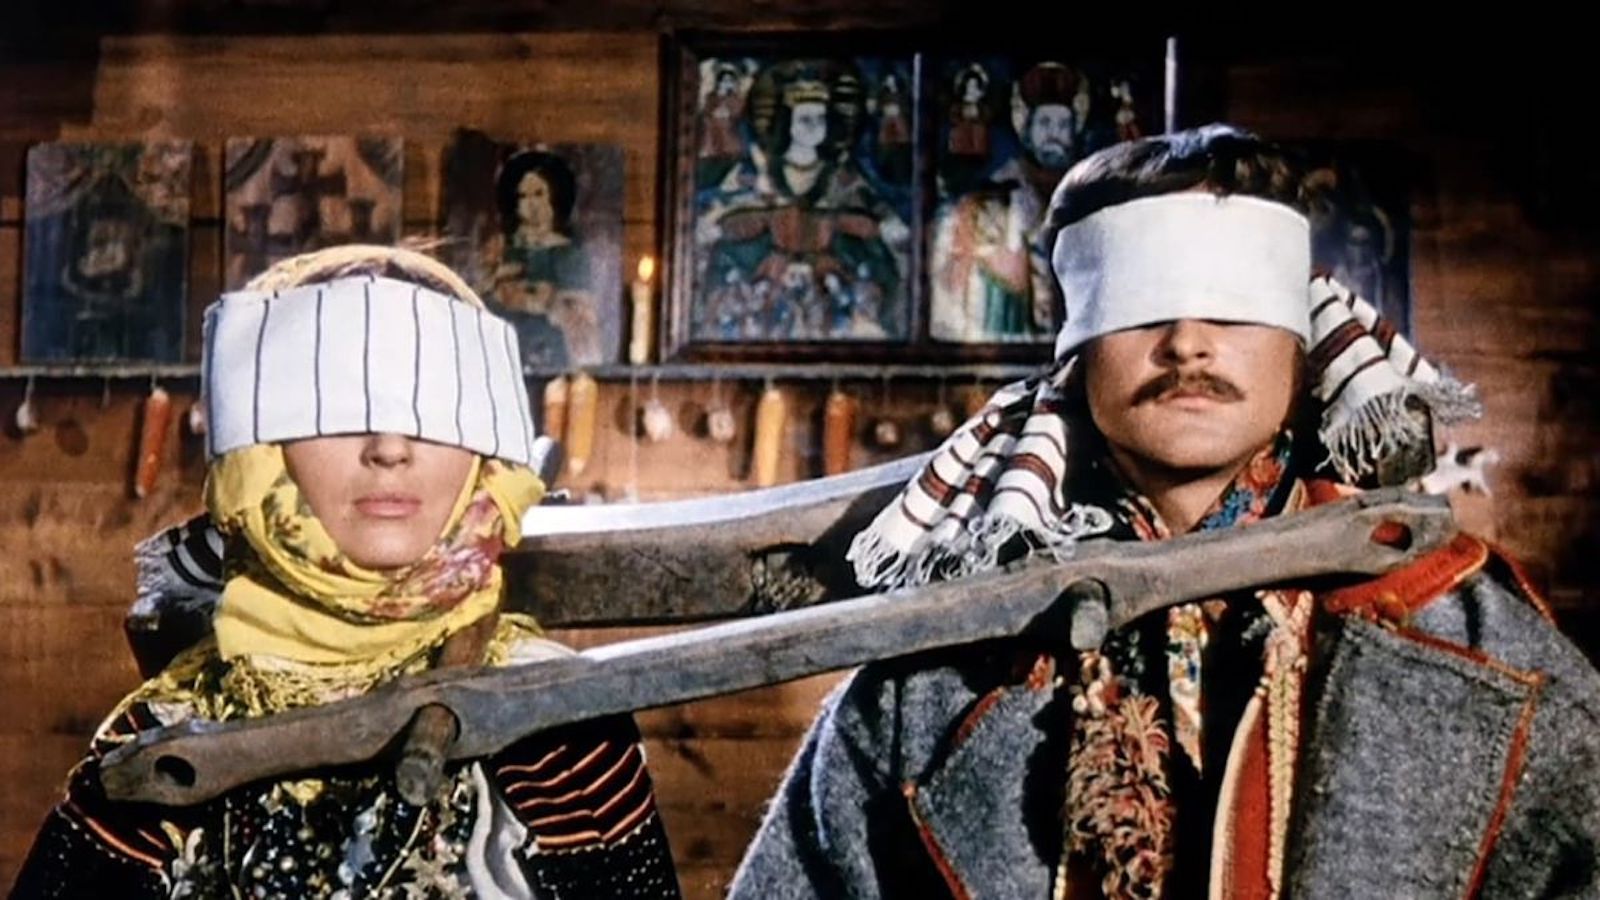 Two blindfolded people stand in wooden stocks around their necks